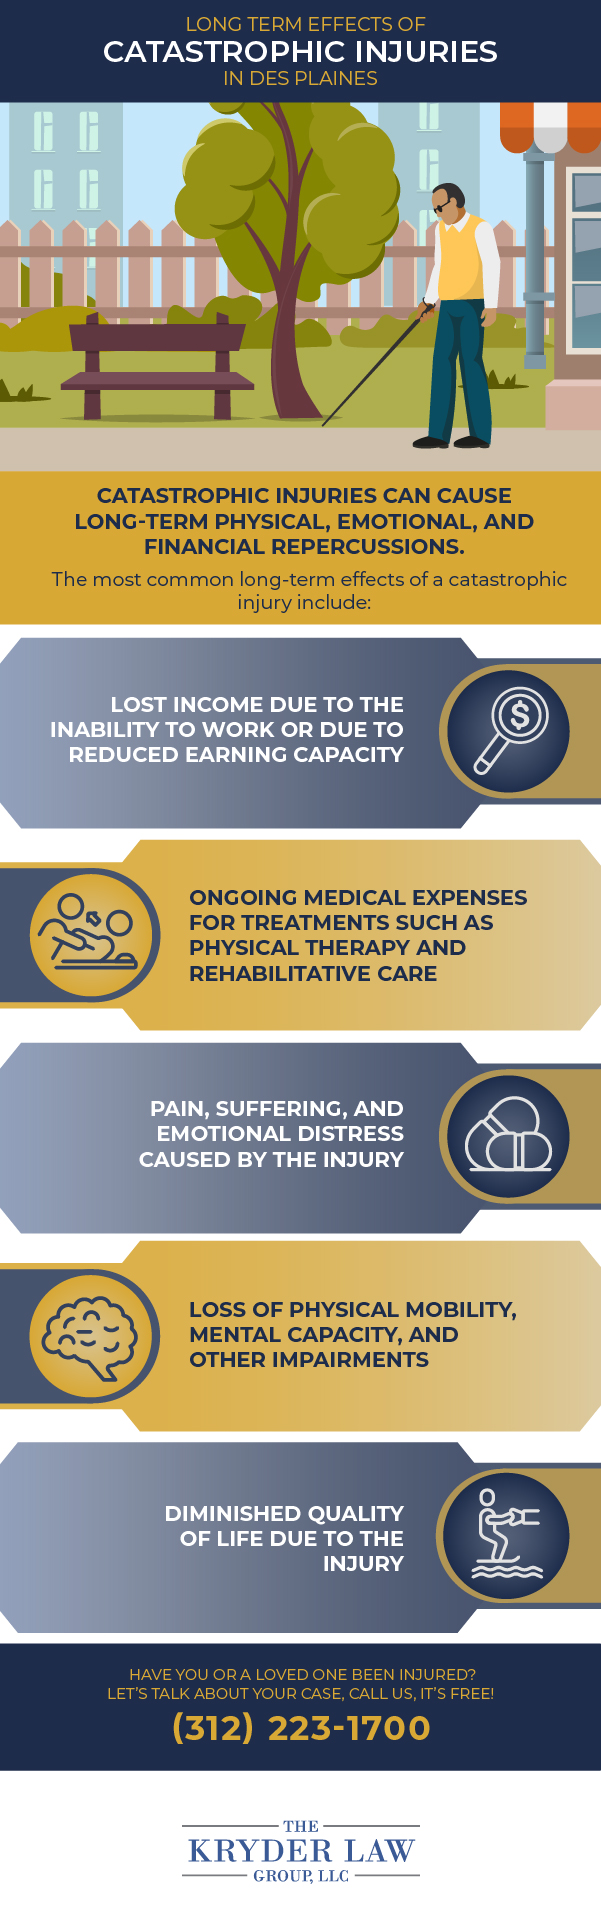 Long Term Effects of Catastrophic Injuries in Des Plaines Infographic